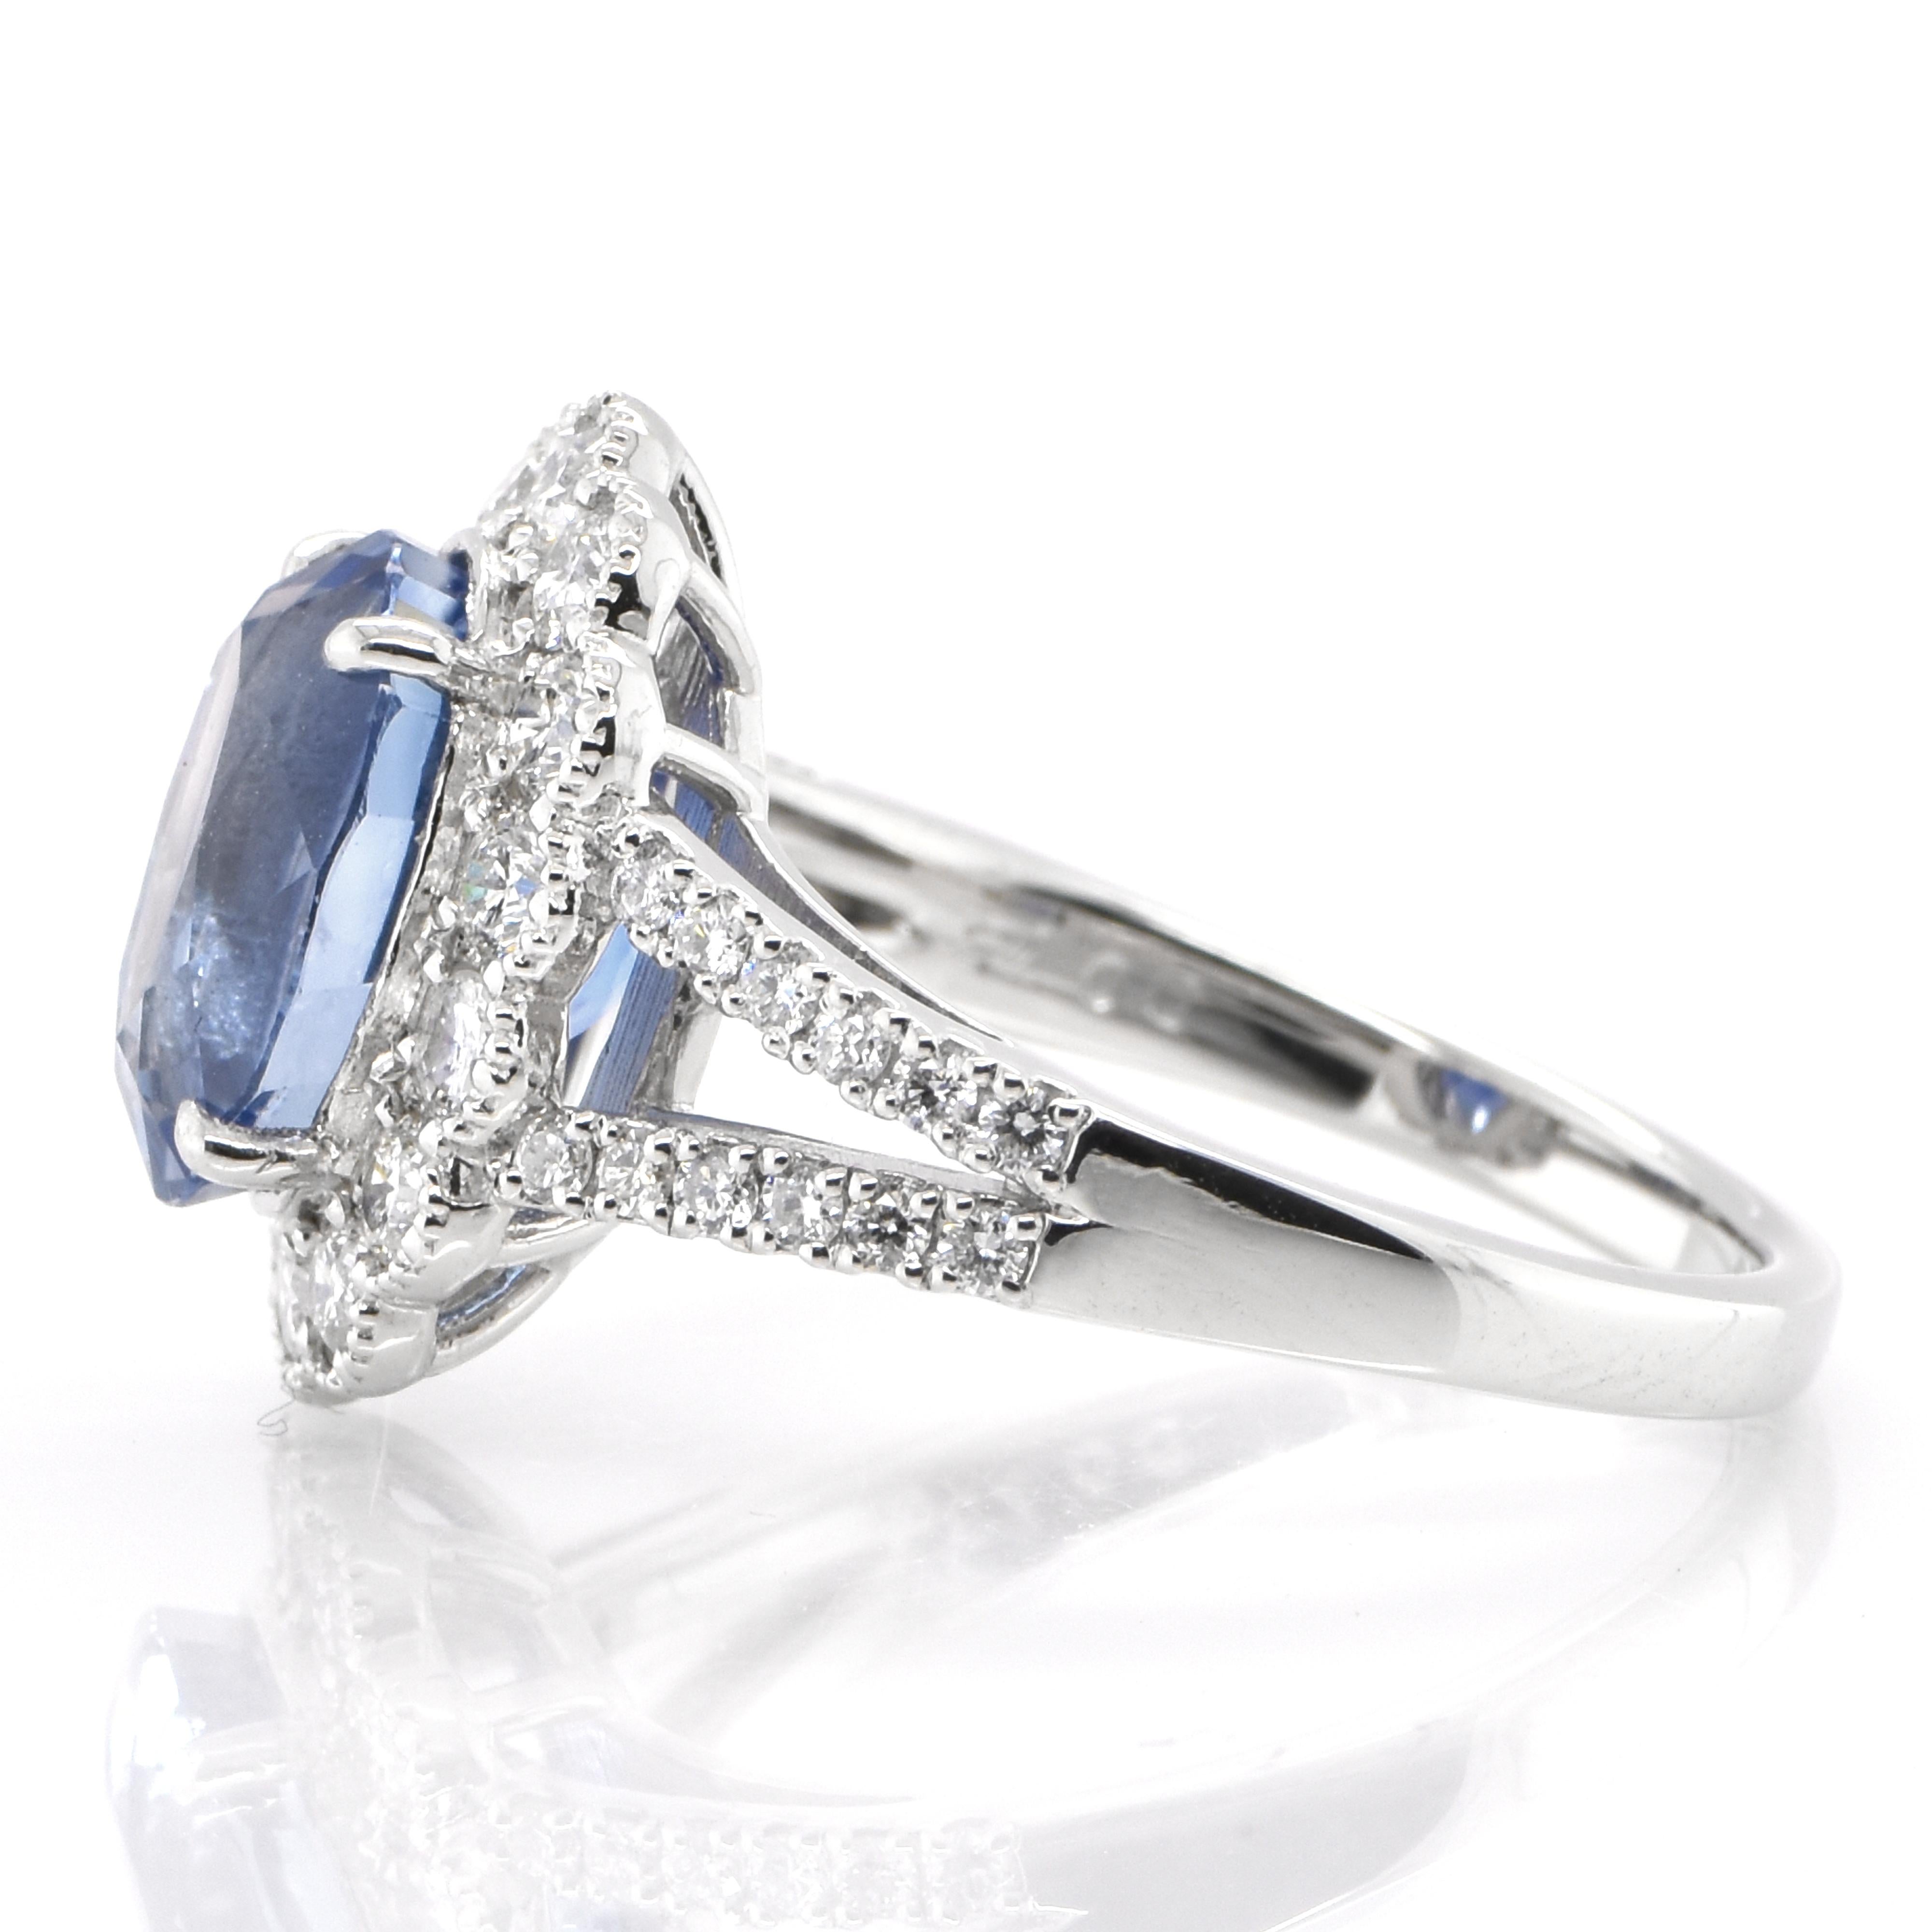 Oval Cut GIA Certified 3.79 Carat Natural, Ceylon Sapphire & Diamond Ring Set in Platinum For Sale